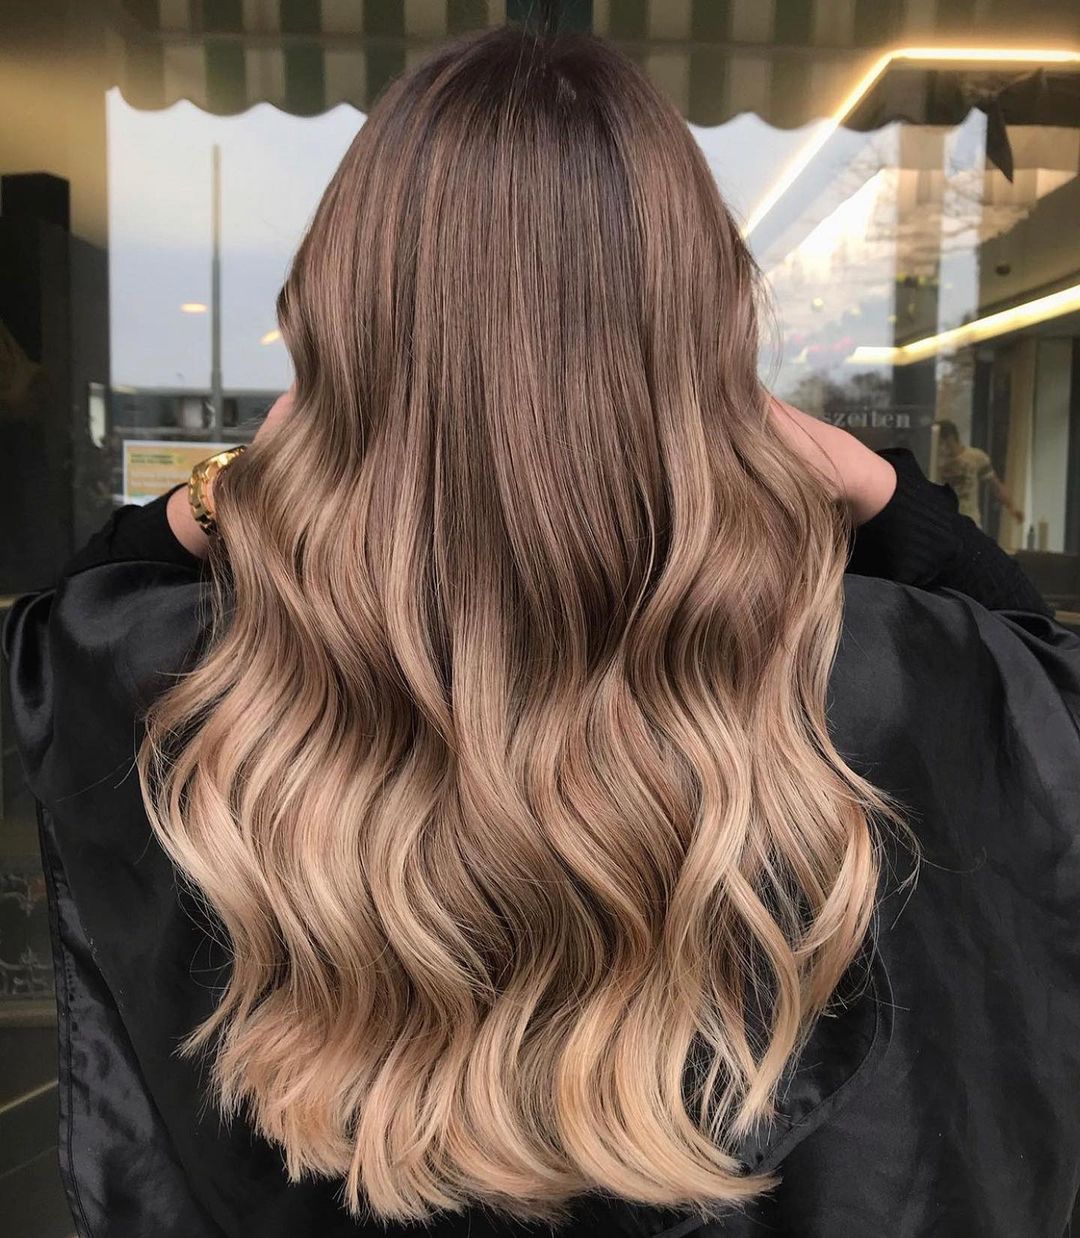 Brown Fall Hair Colors 2024: 27 Stunning Ideas to Transform Your Look